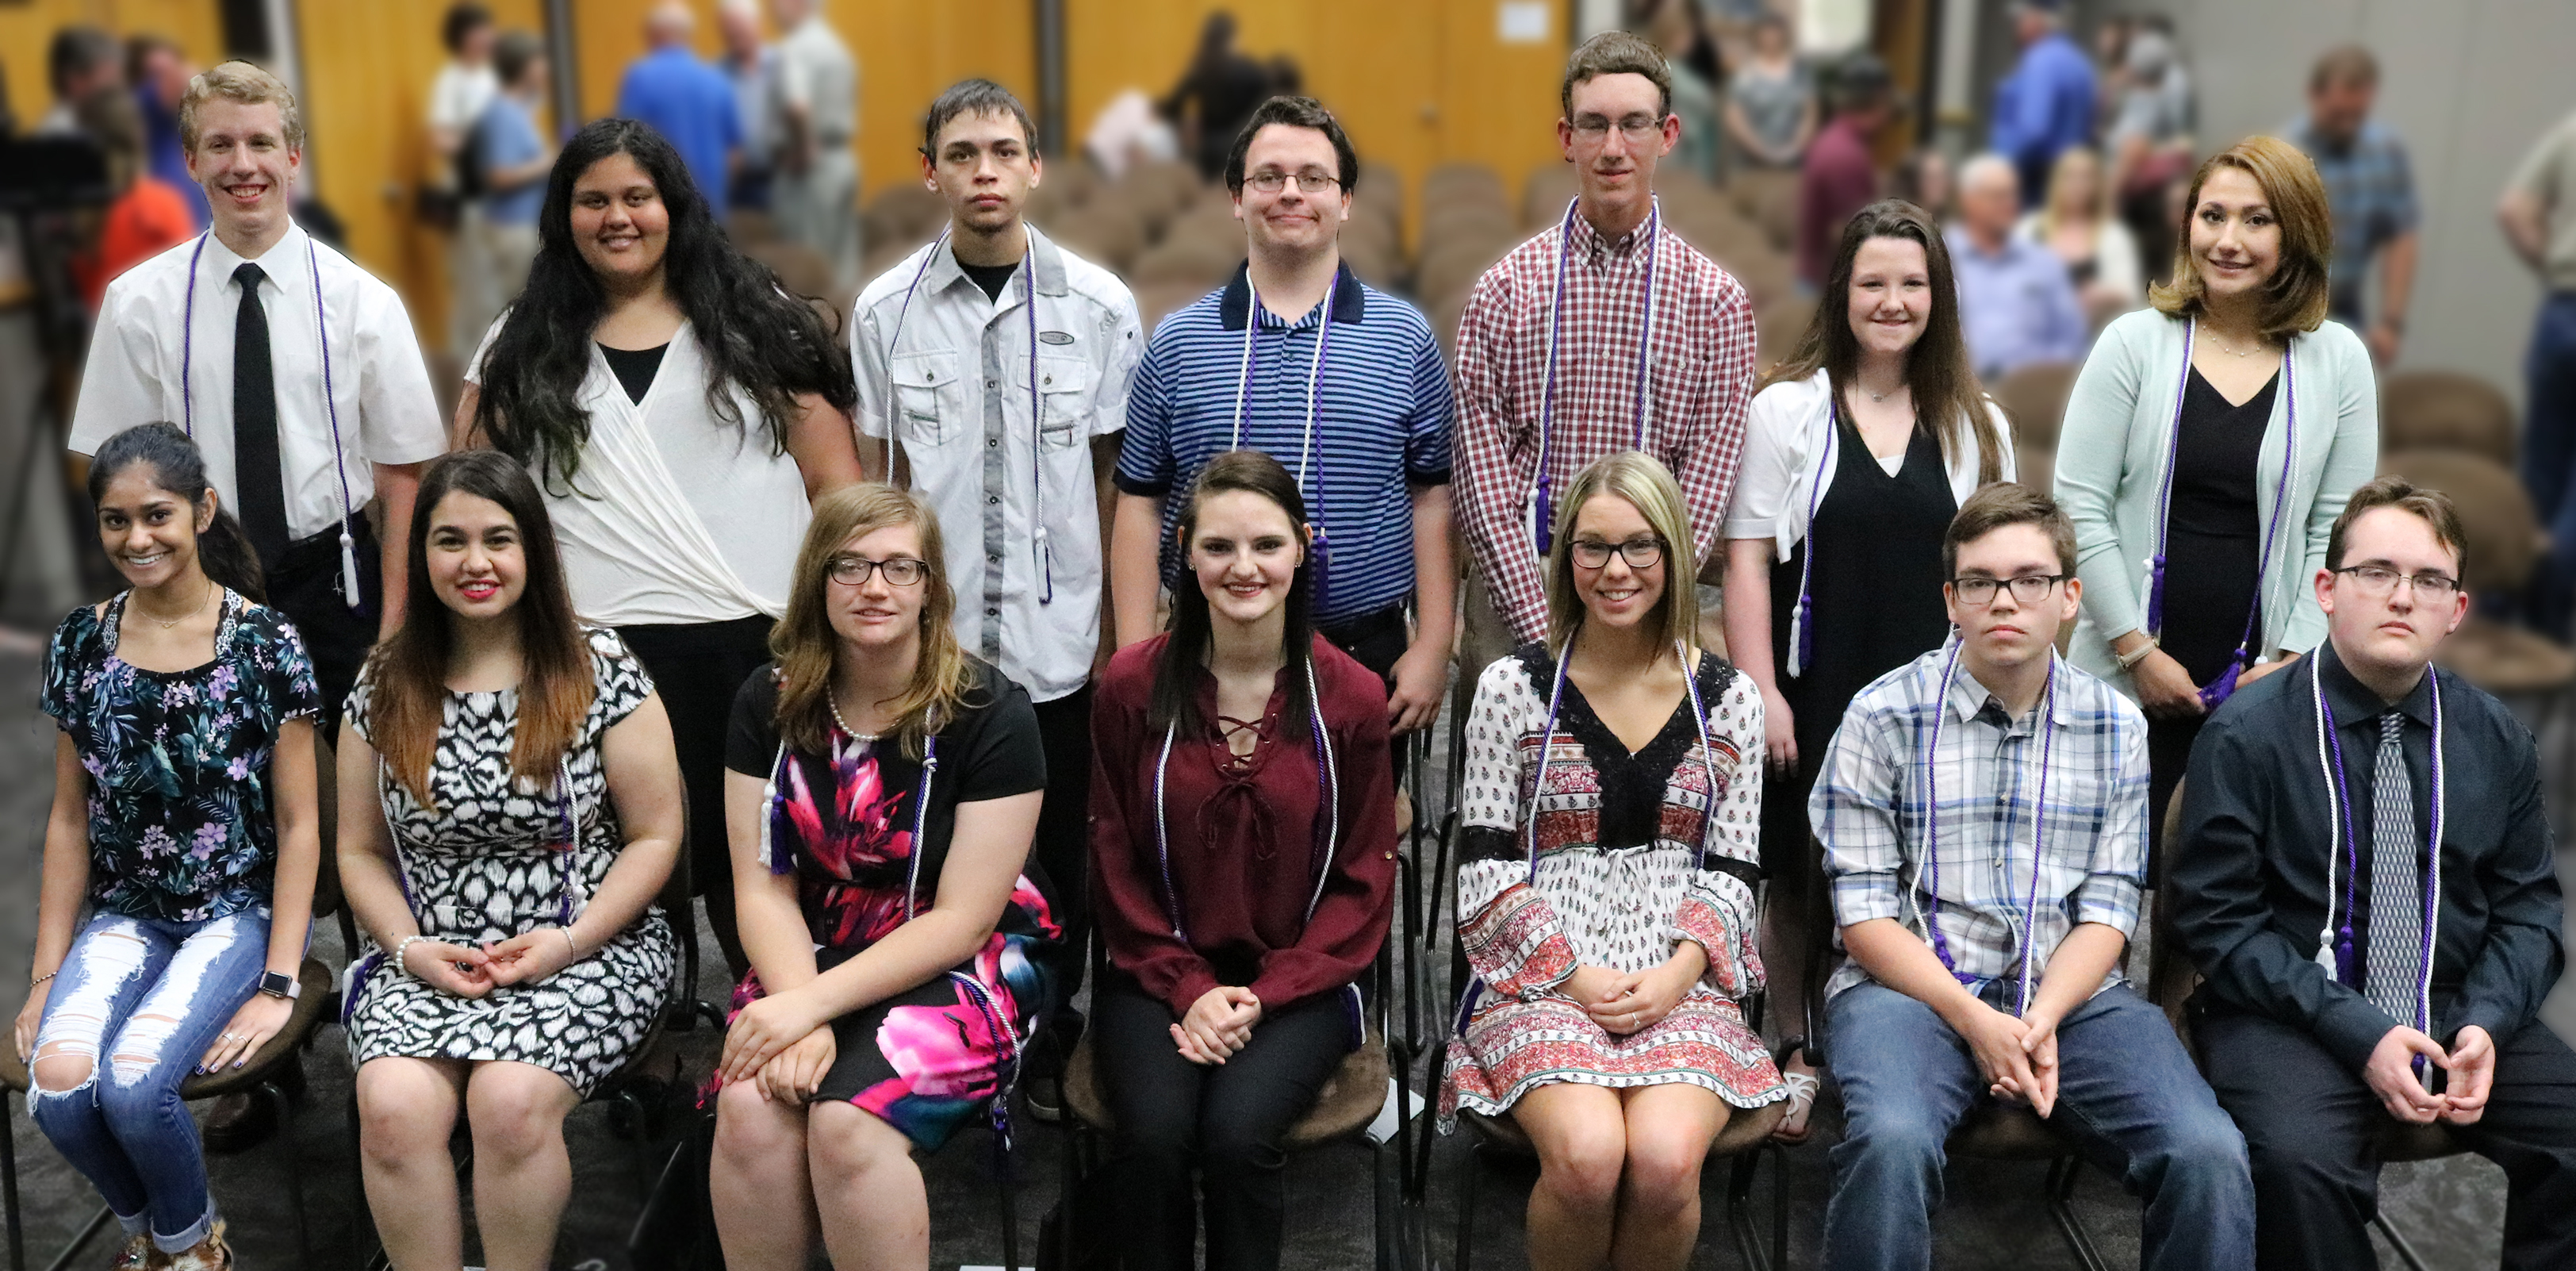 Technical Honor Society students named